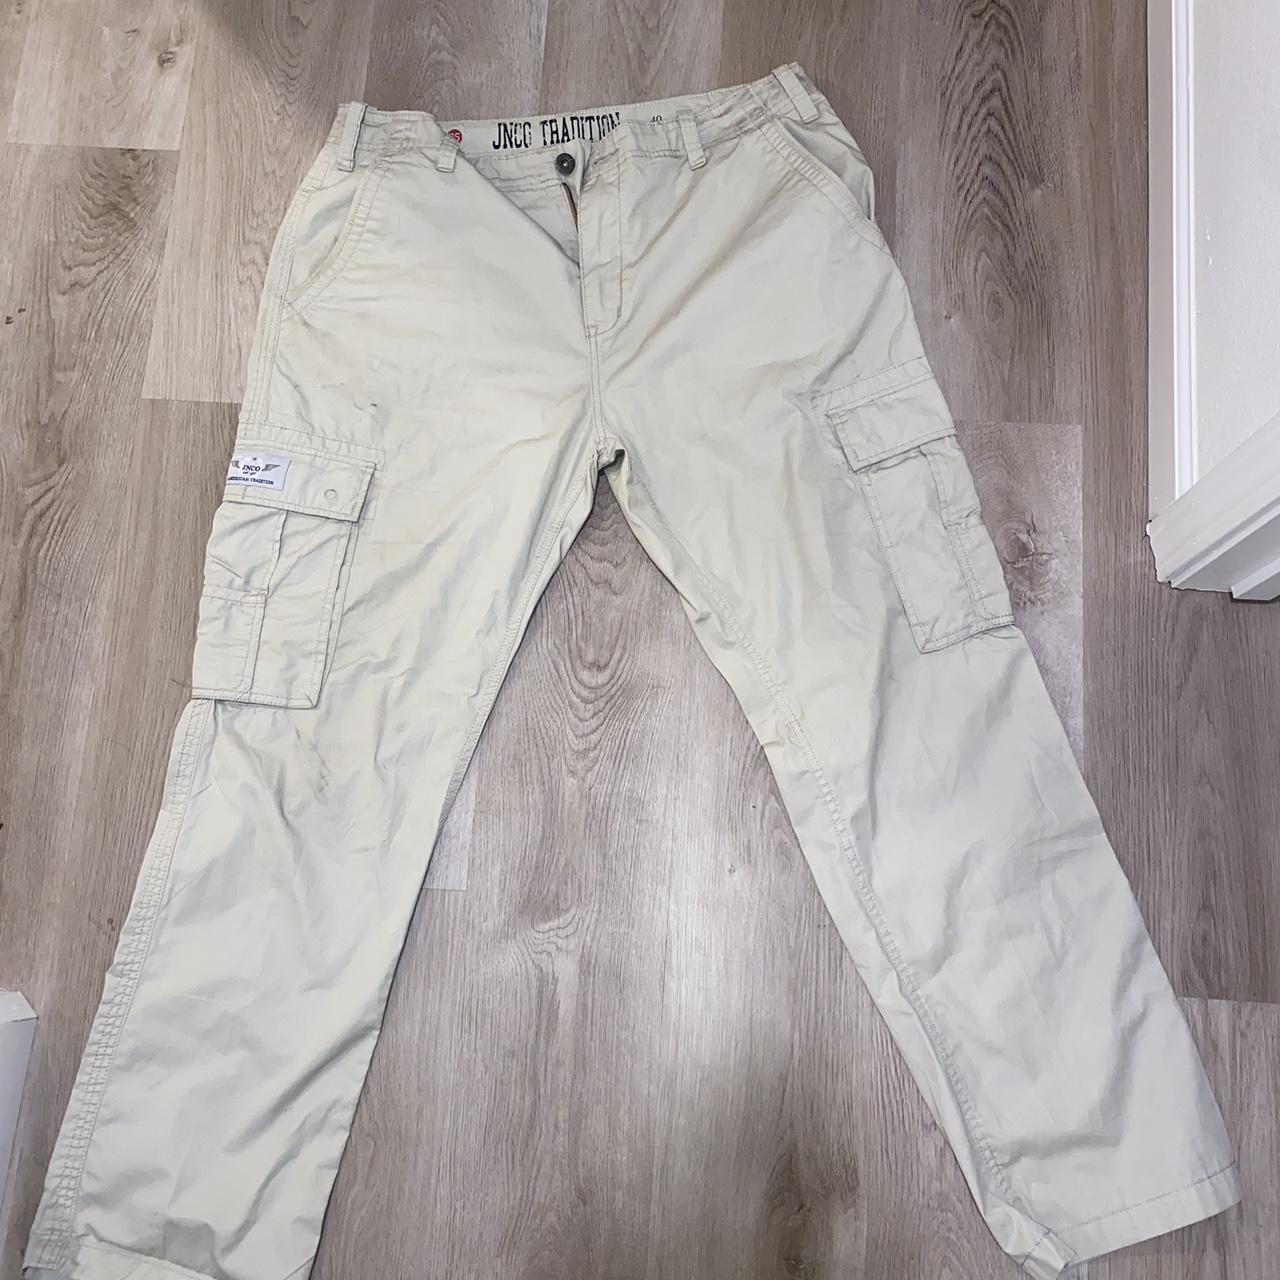 Really really old jnco cargos Says size 40 Waist:... - Depop